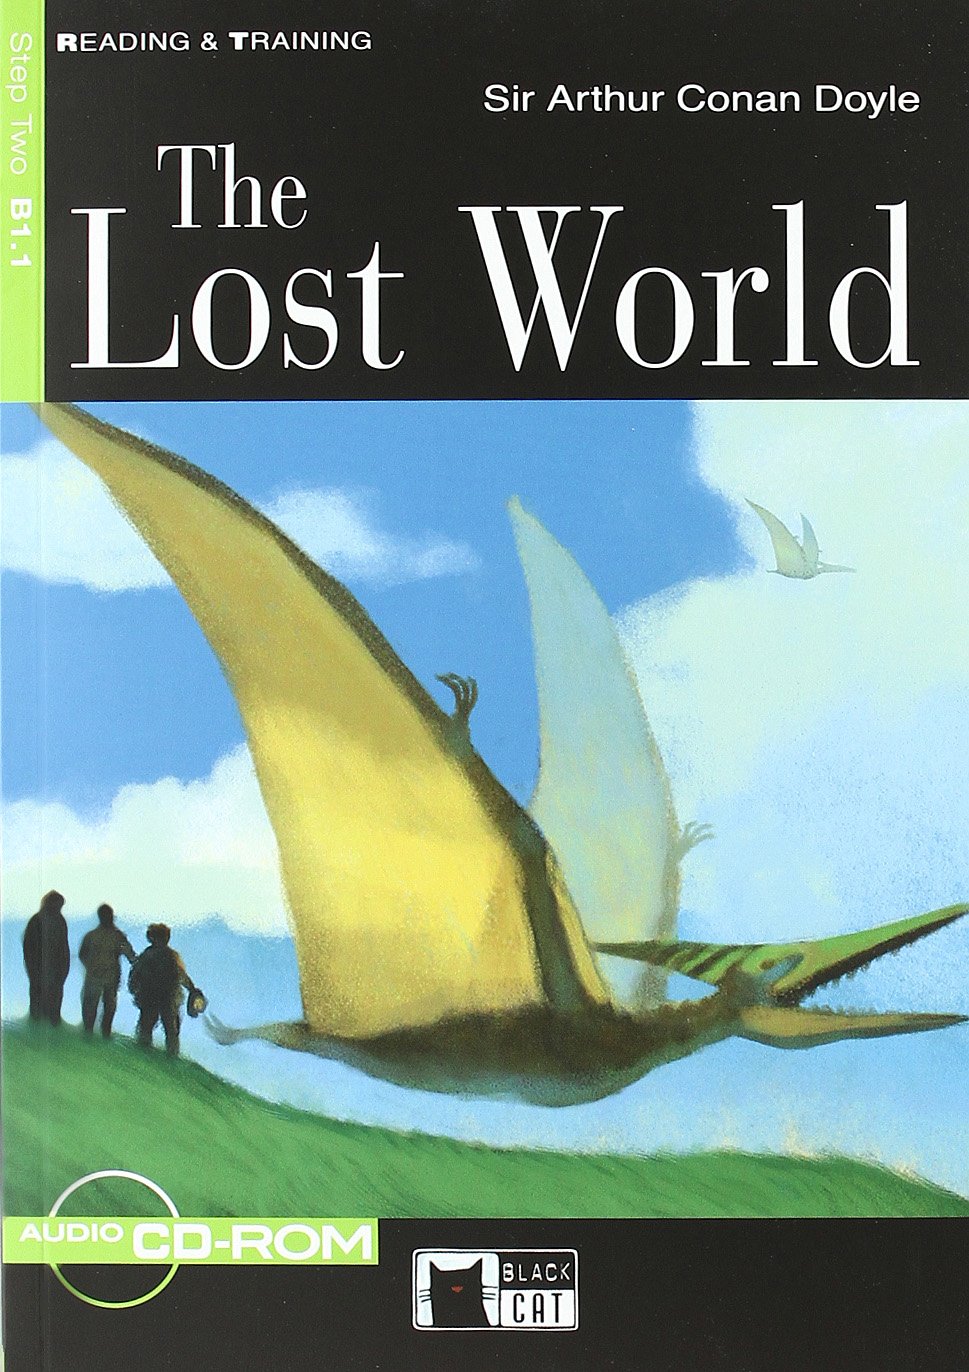 LOST WORLD,THE (READING & TRAINING STEP2, B1.1) Book+ AudioCD+CD-ROM